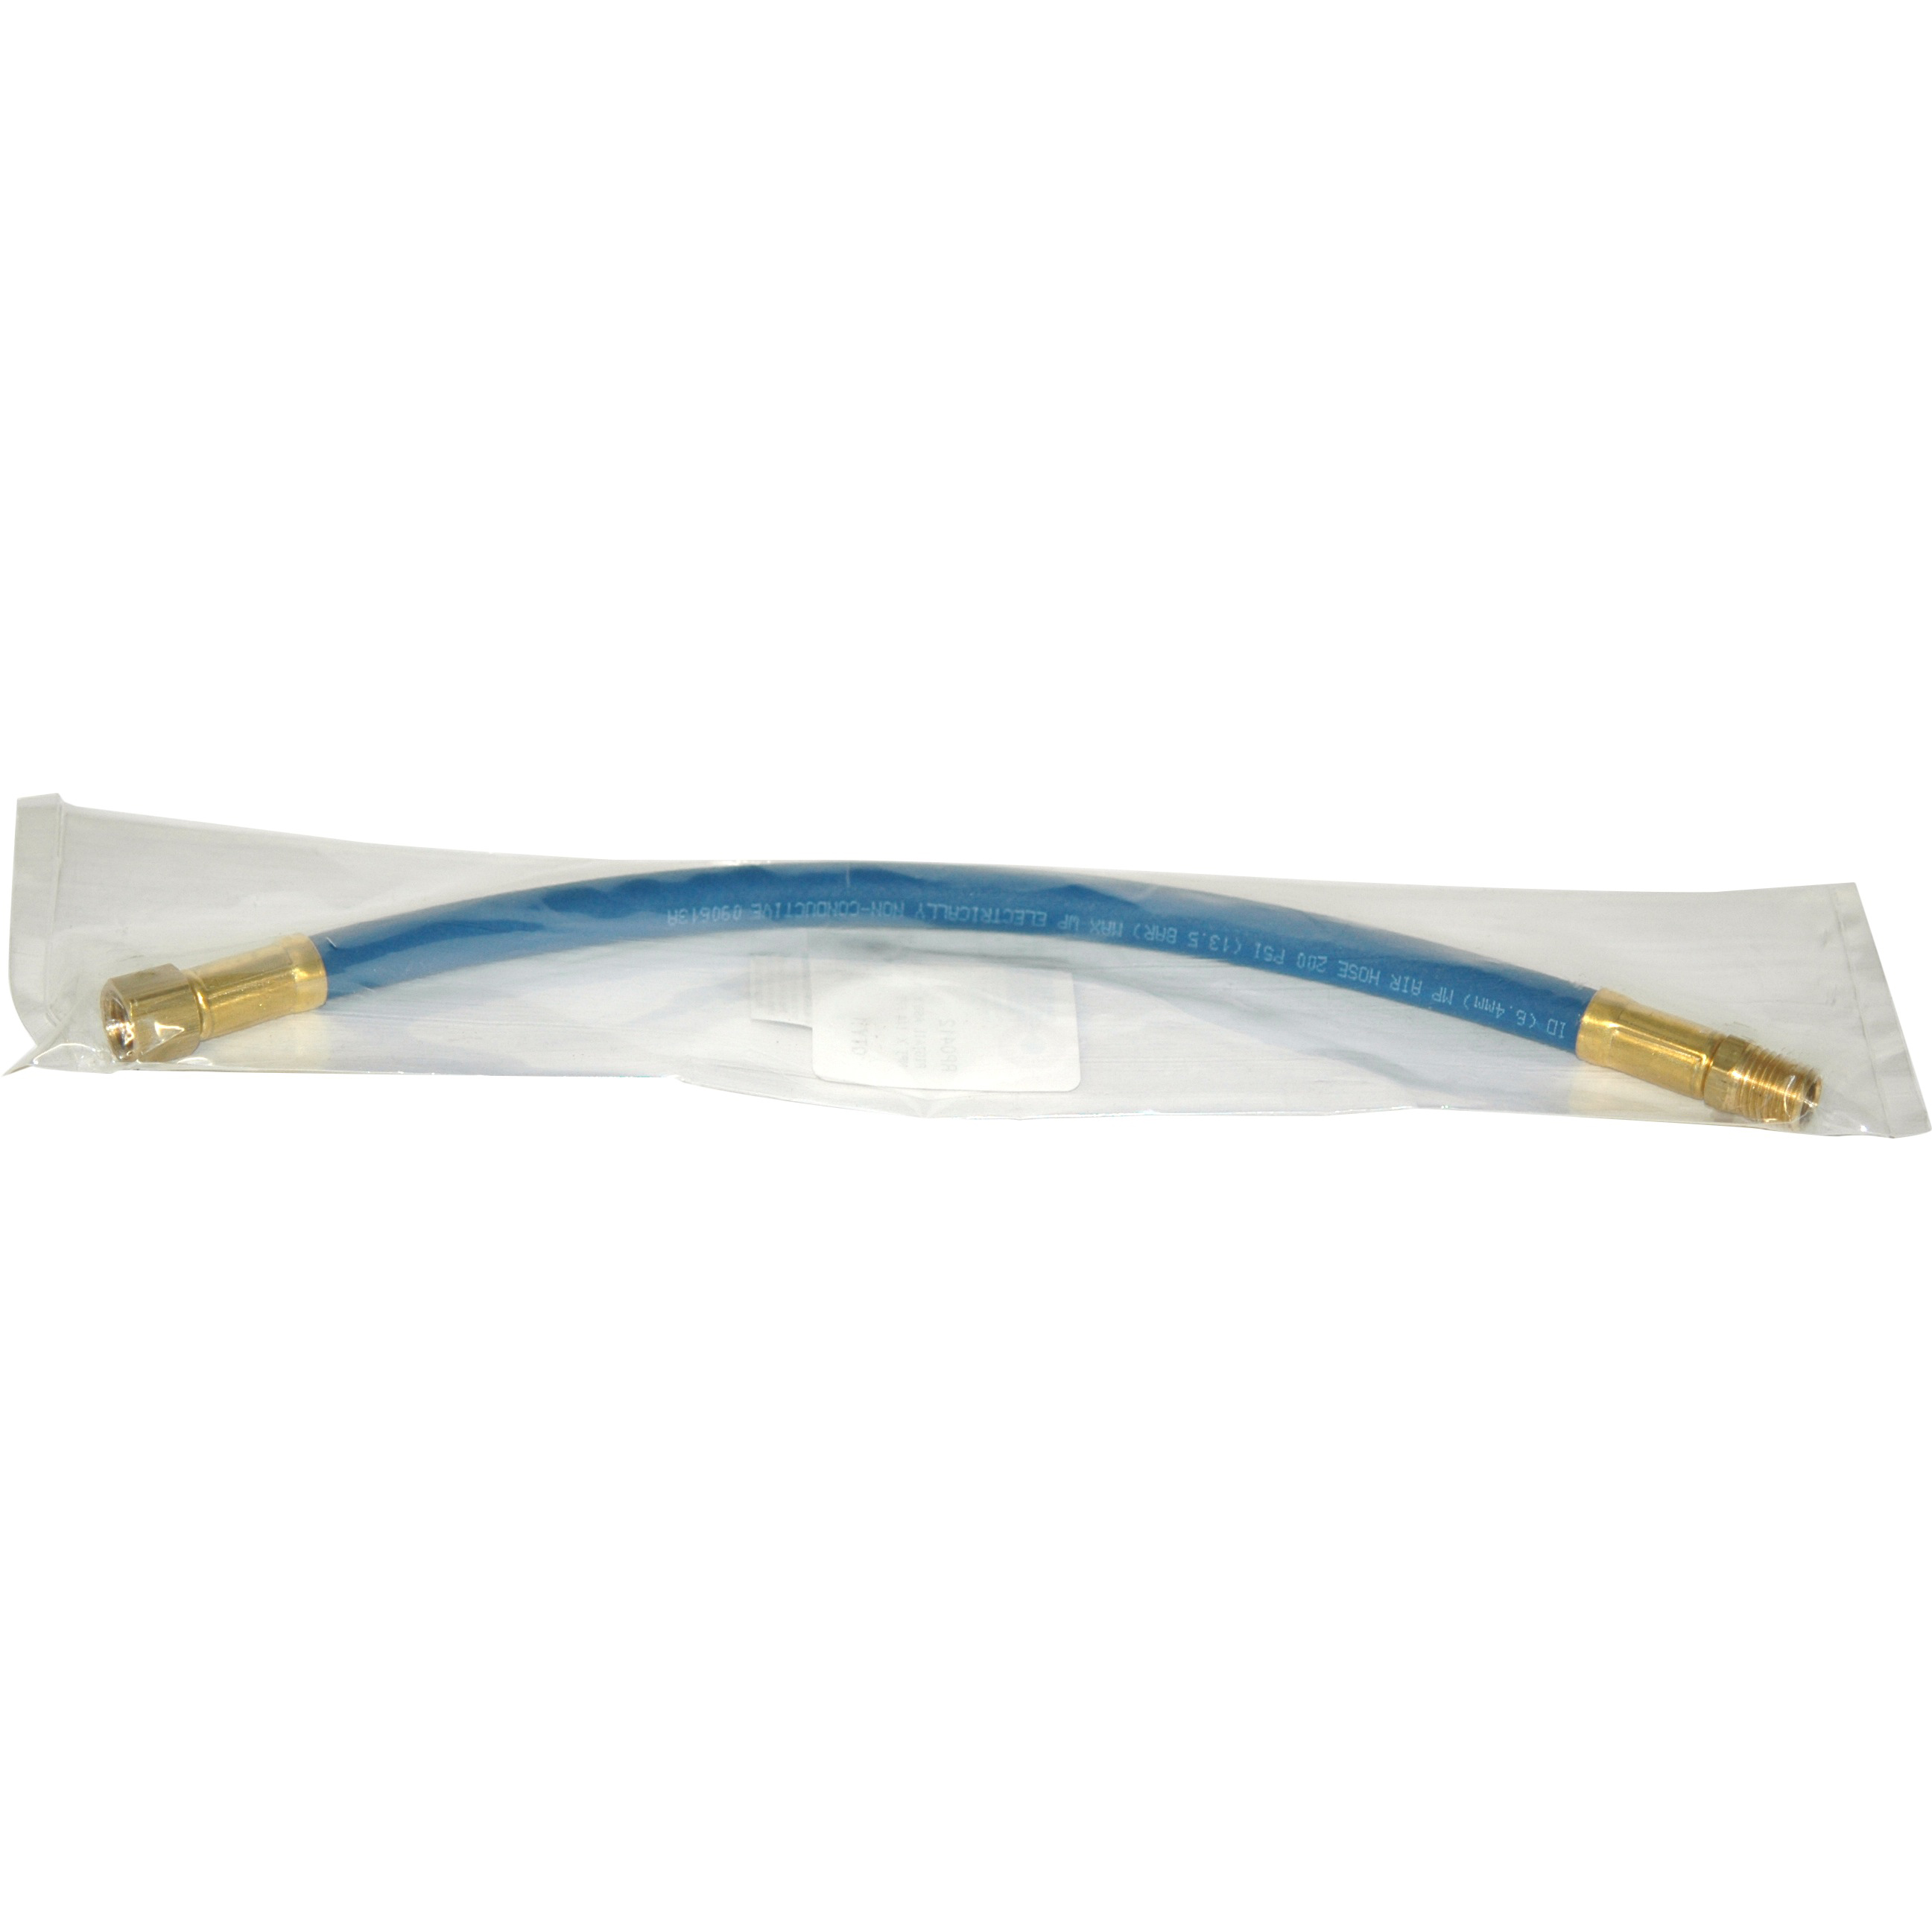 Air Hose Extension 12 inch